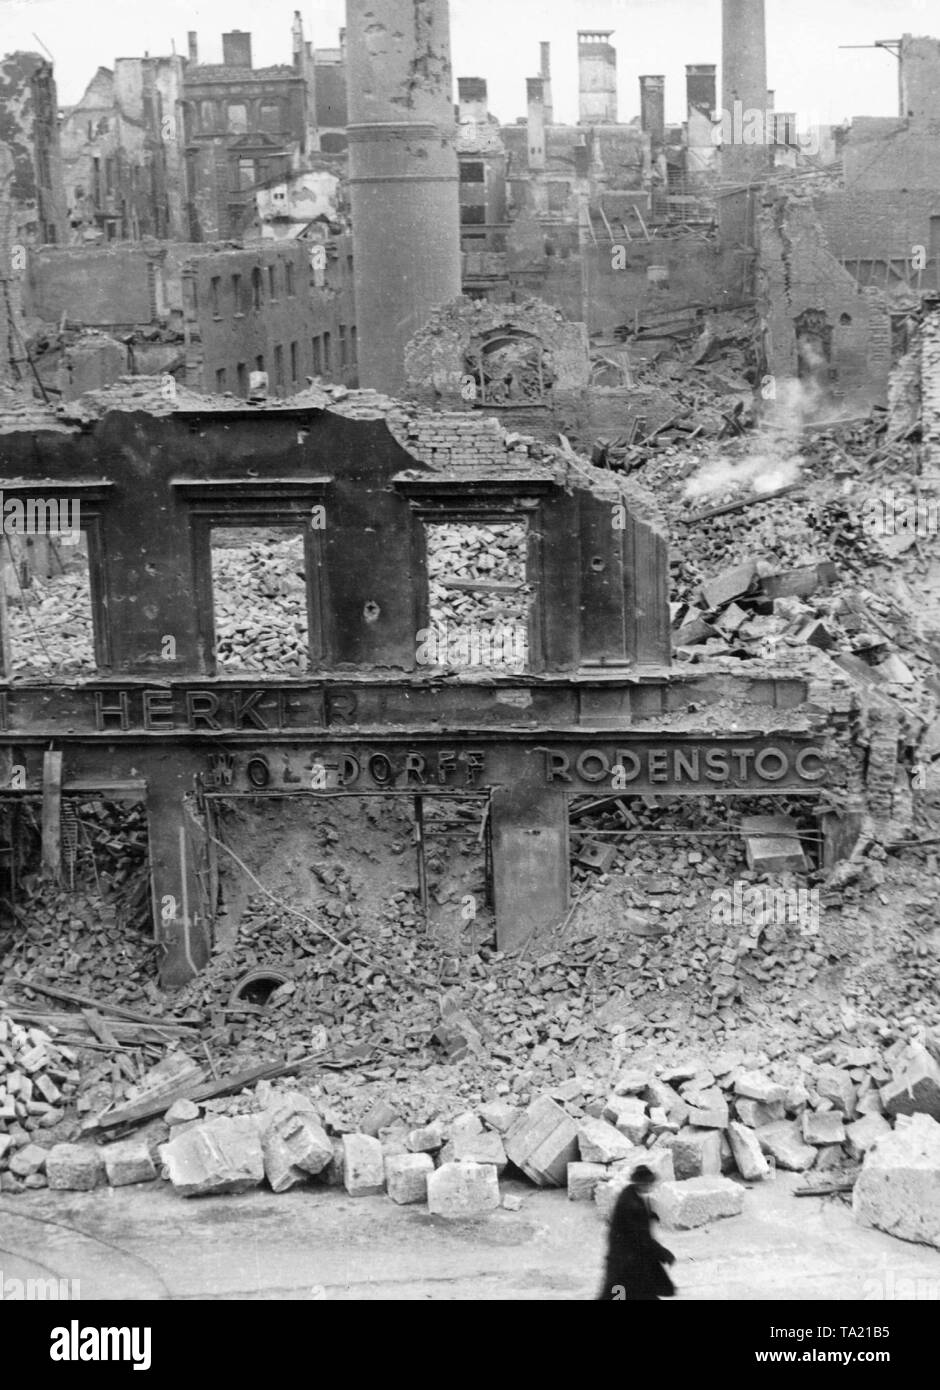 Munich city center destroyed by the Allied air raids in the spring of 1945. In the foreground on the ruins is the inscription 'Herker', 'Wolsdorf' and 'Rodenstock'. Stock Photo